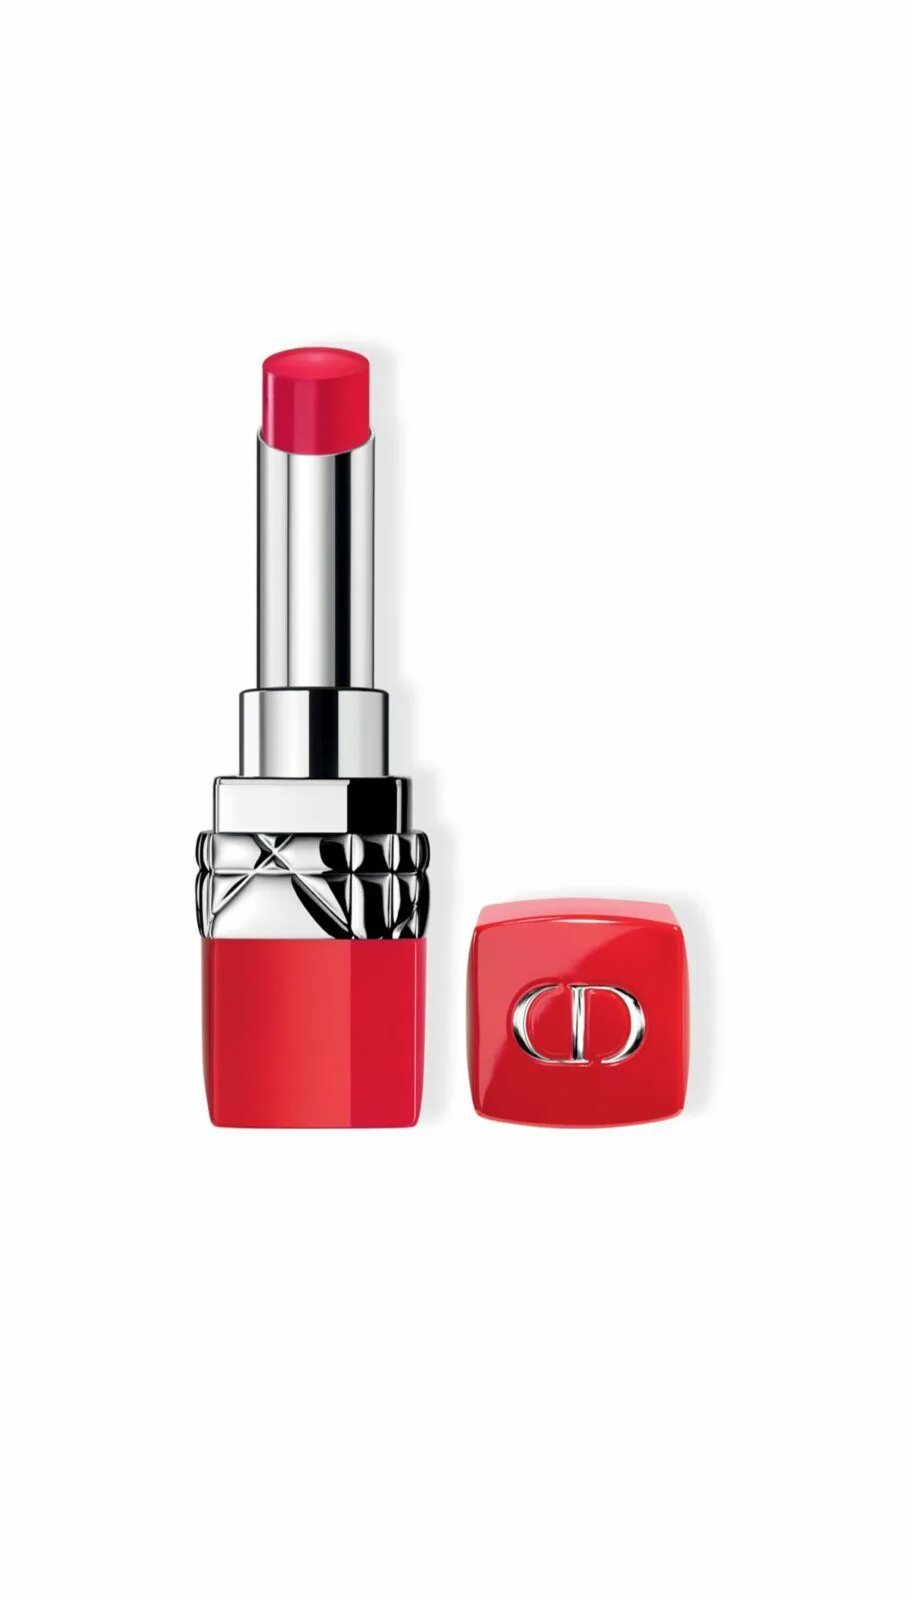 Rouge Dior Ultra rouge. Christian Dior Ultra rouge. Помада диор ультра Руж 651. Rouge Dior Ultra Care 168. Губные помады dior